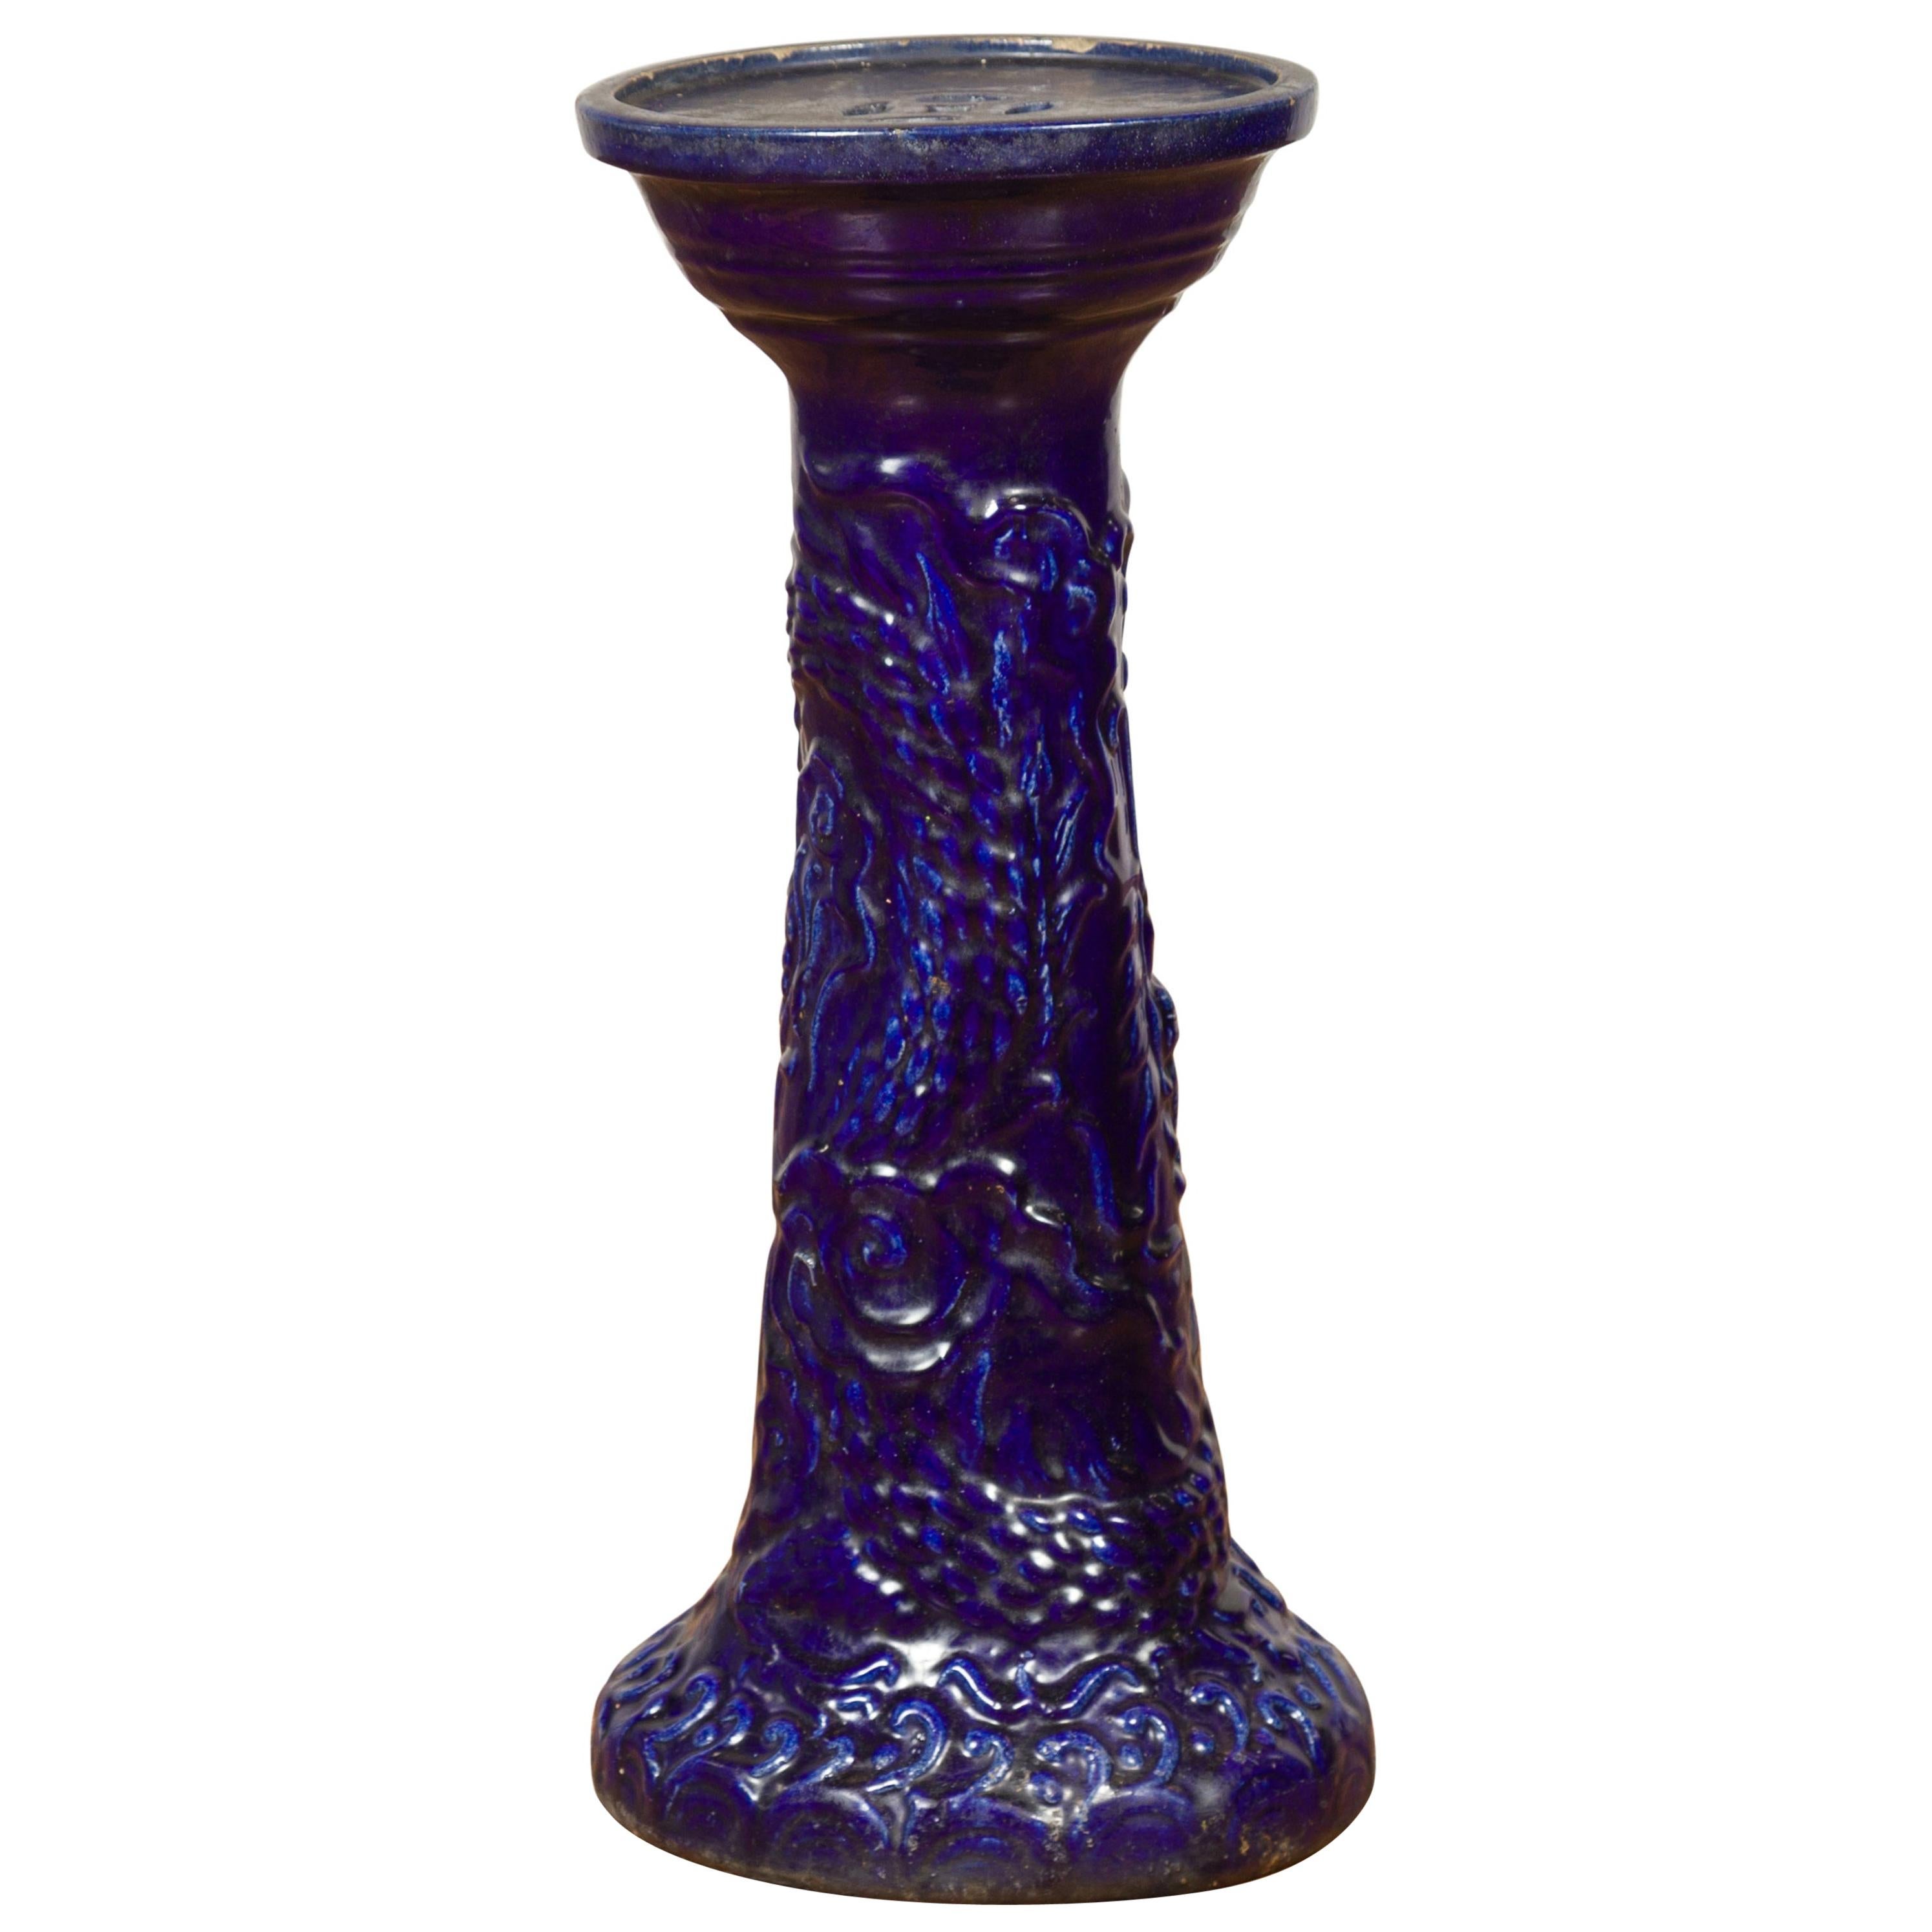 Chinese Antique Dark Blue Glazed Artisan Pedestal Stand with Scrolling Effects